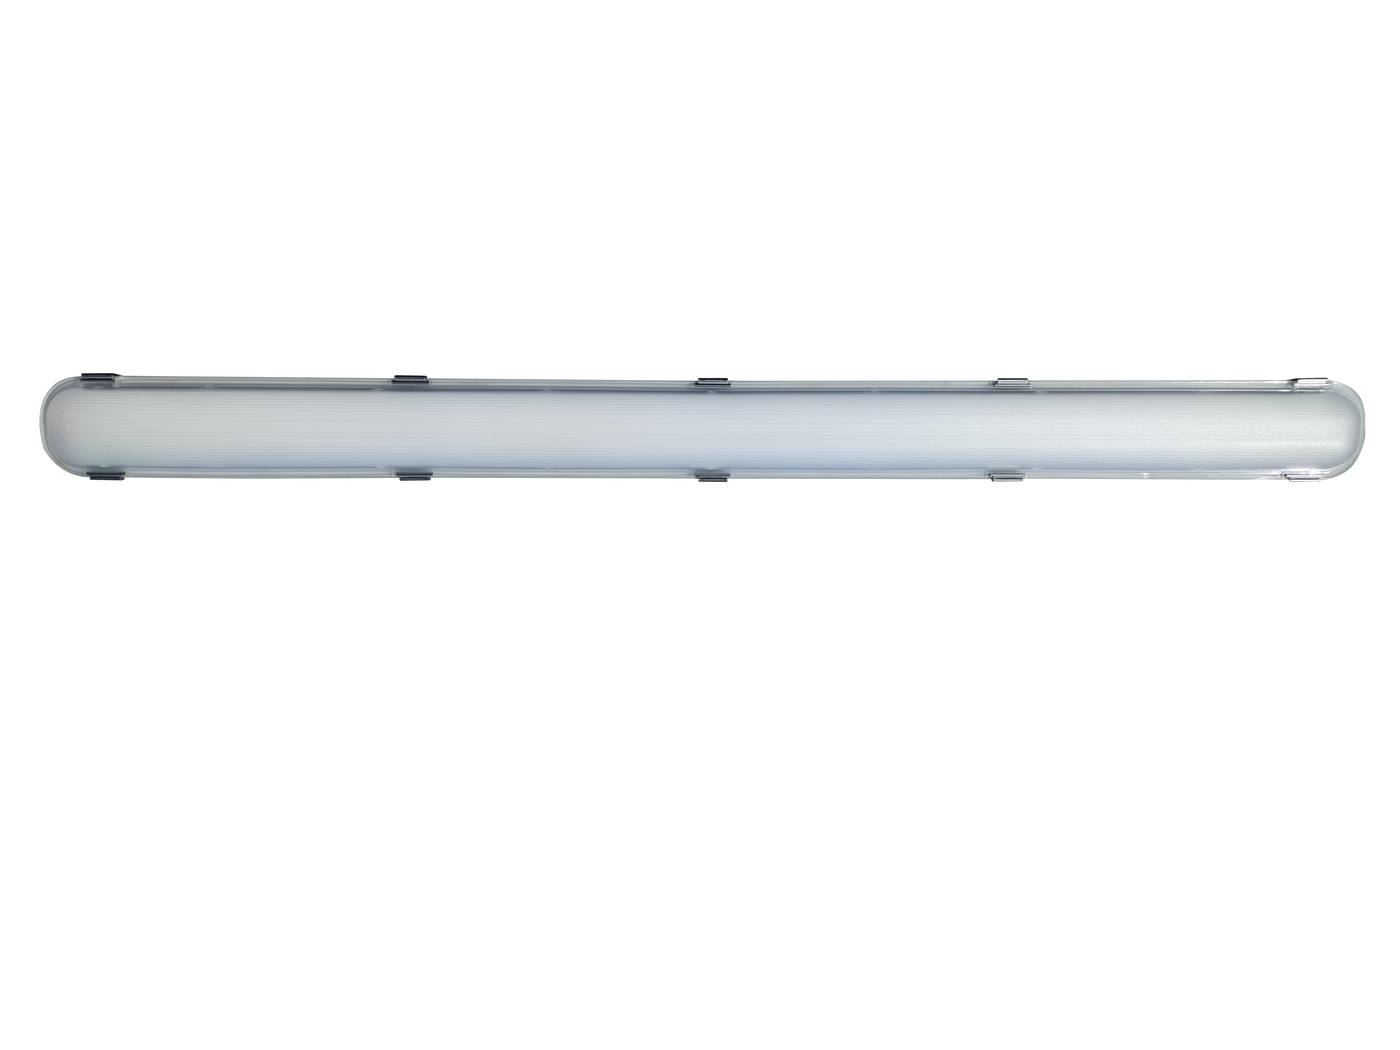 4FT LED Vapor Tight Fixture, 7611 Lumens, CCT and Wattage Selectable, 120-277V